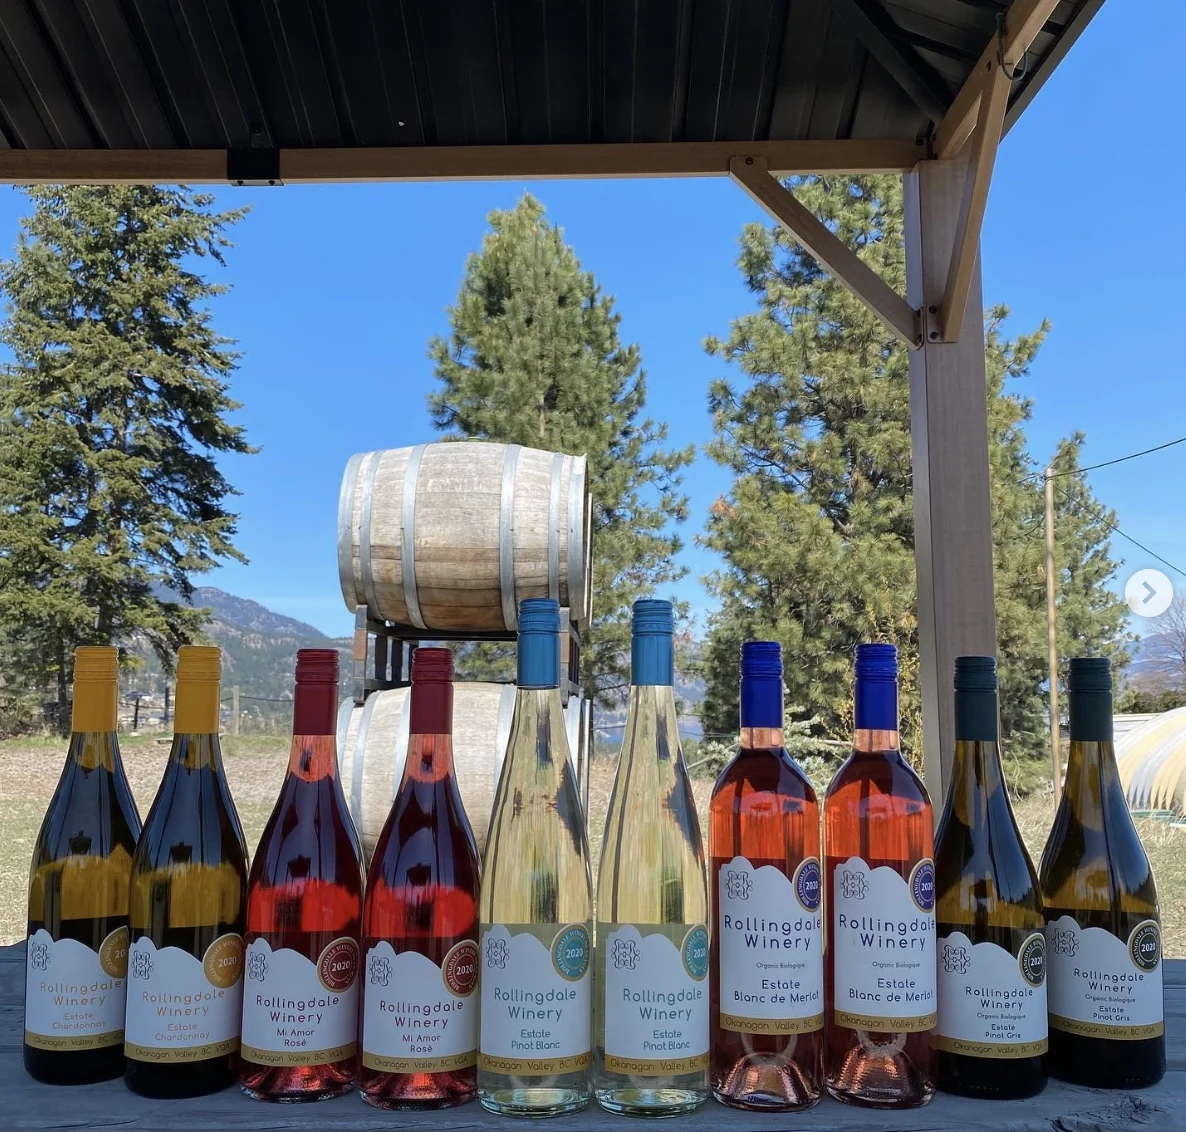 If you're heading to the Okanagan soon and planning on spending time in Kelowna, you don't want to miss this guide to the best wineries in Kelowna! From organic wineries to wineries with the best view, this guide will help you plan your visit to Kelowna’s incredible wine region. Pictured here: Rollingdale Winery